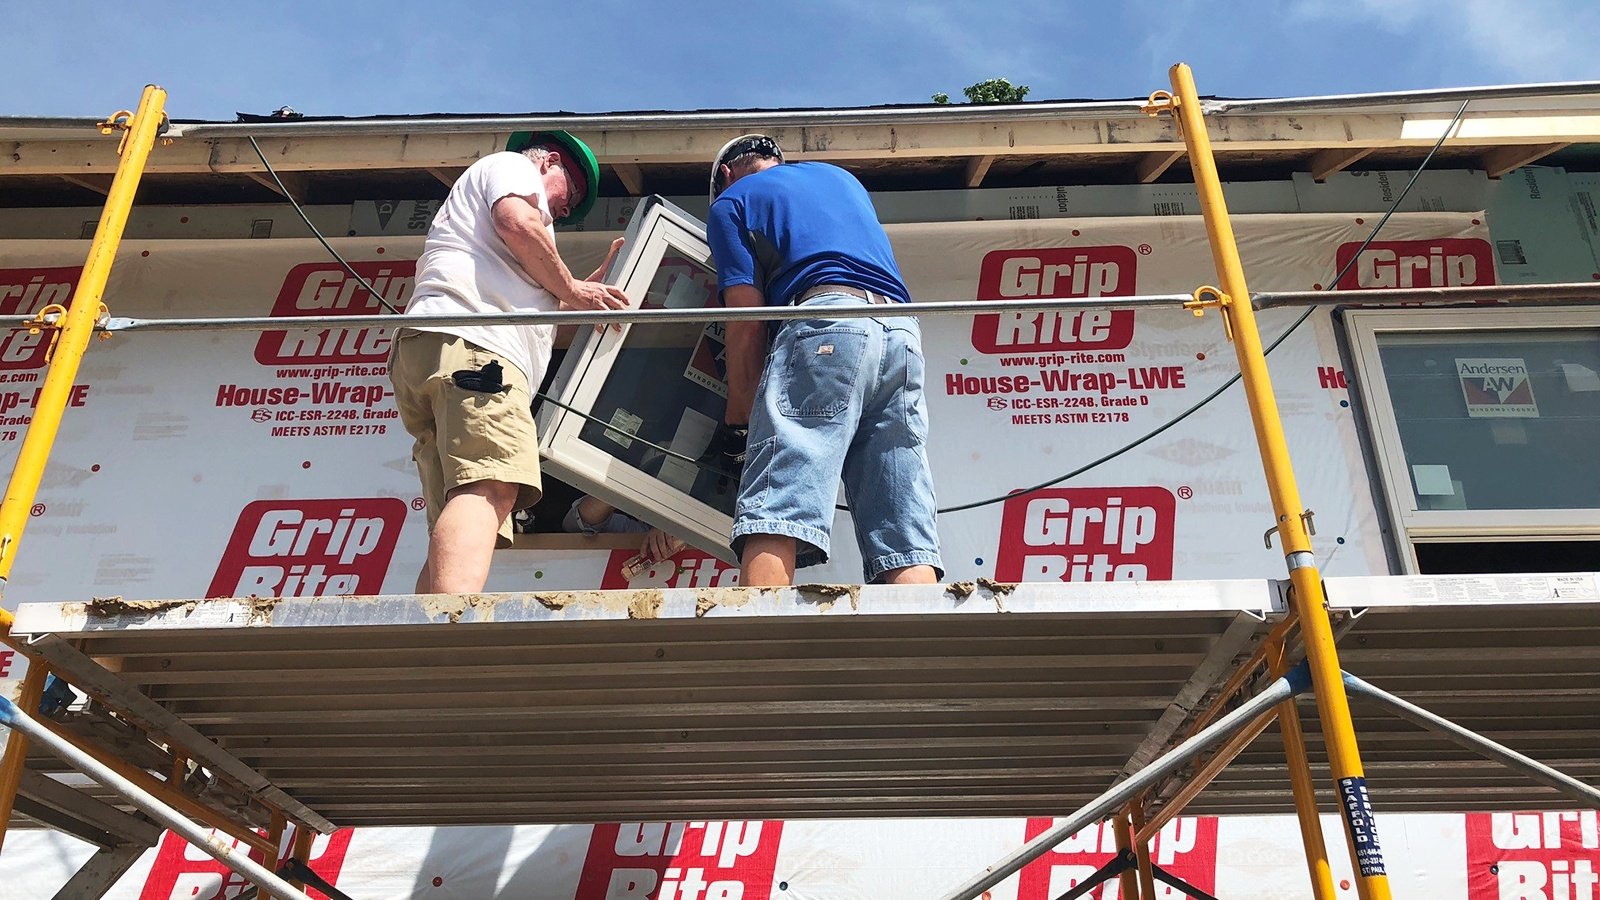 Installing a window during the neighbors' build day